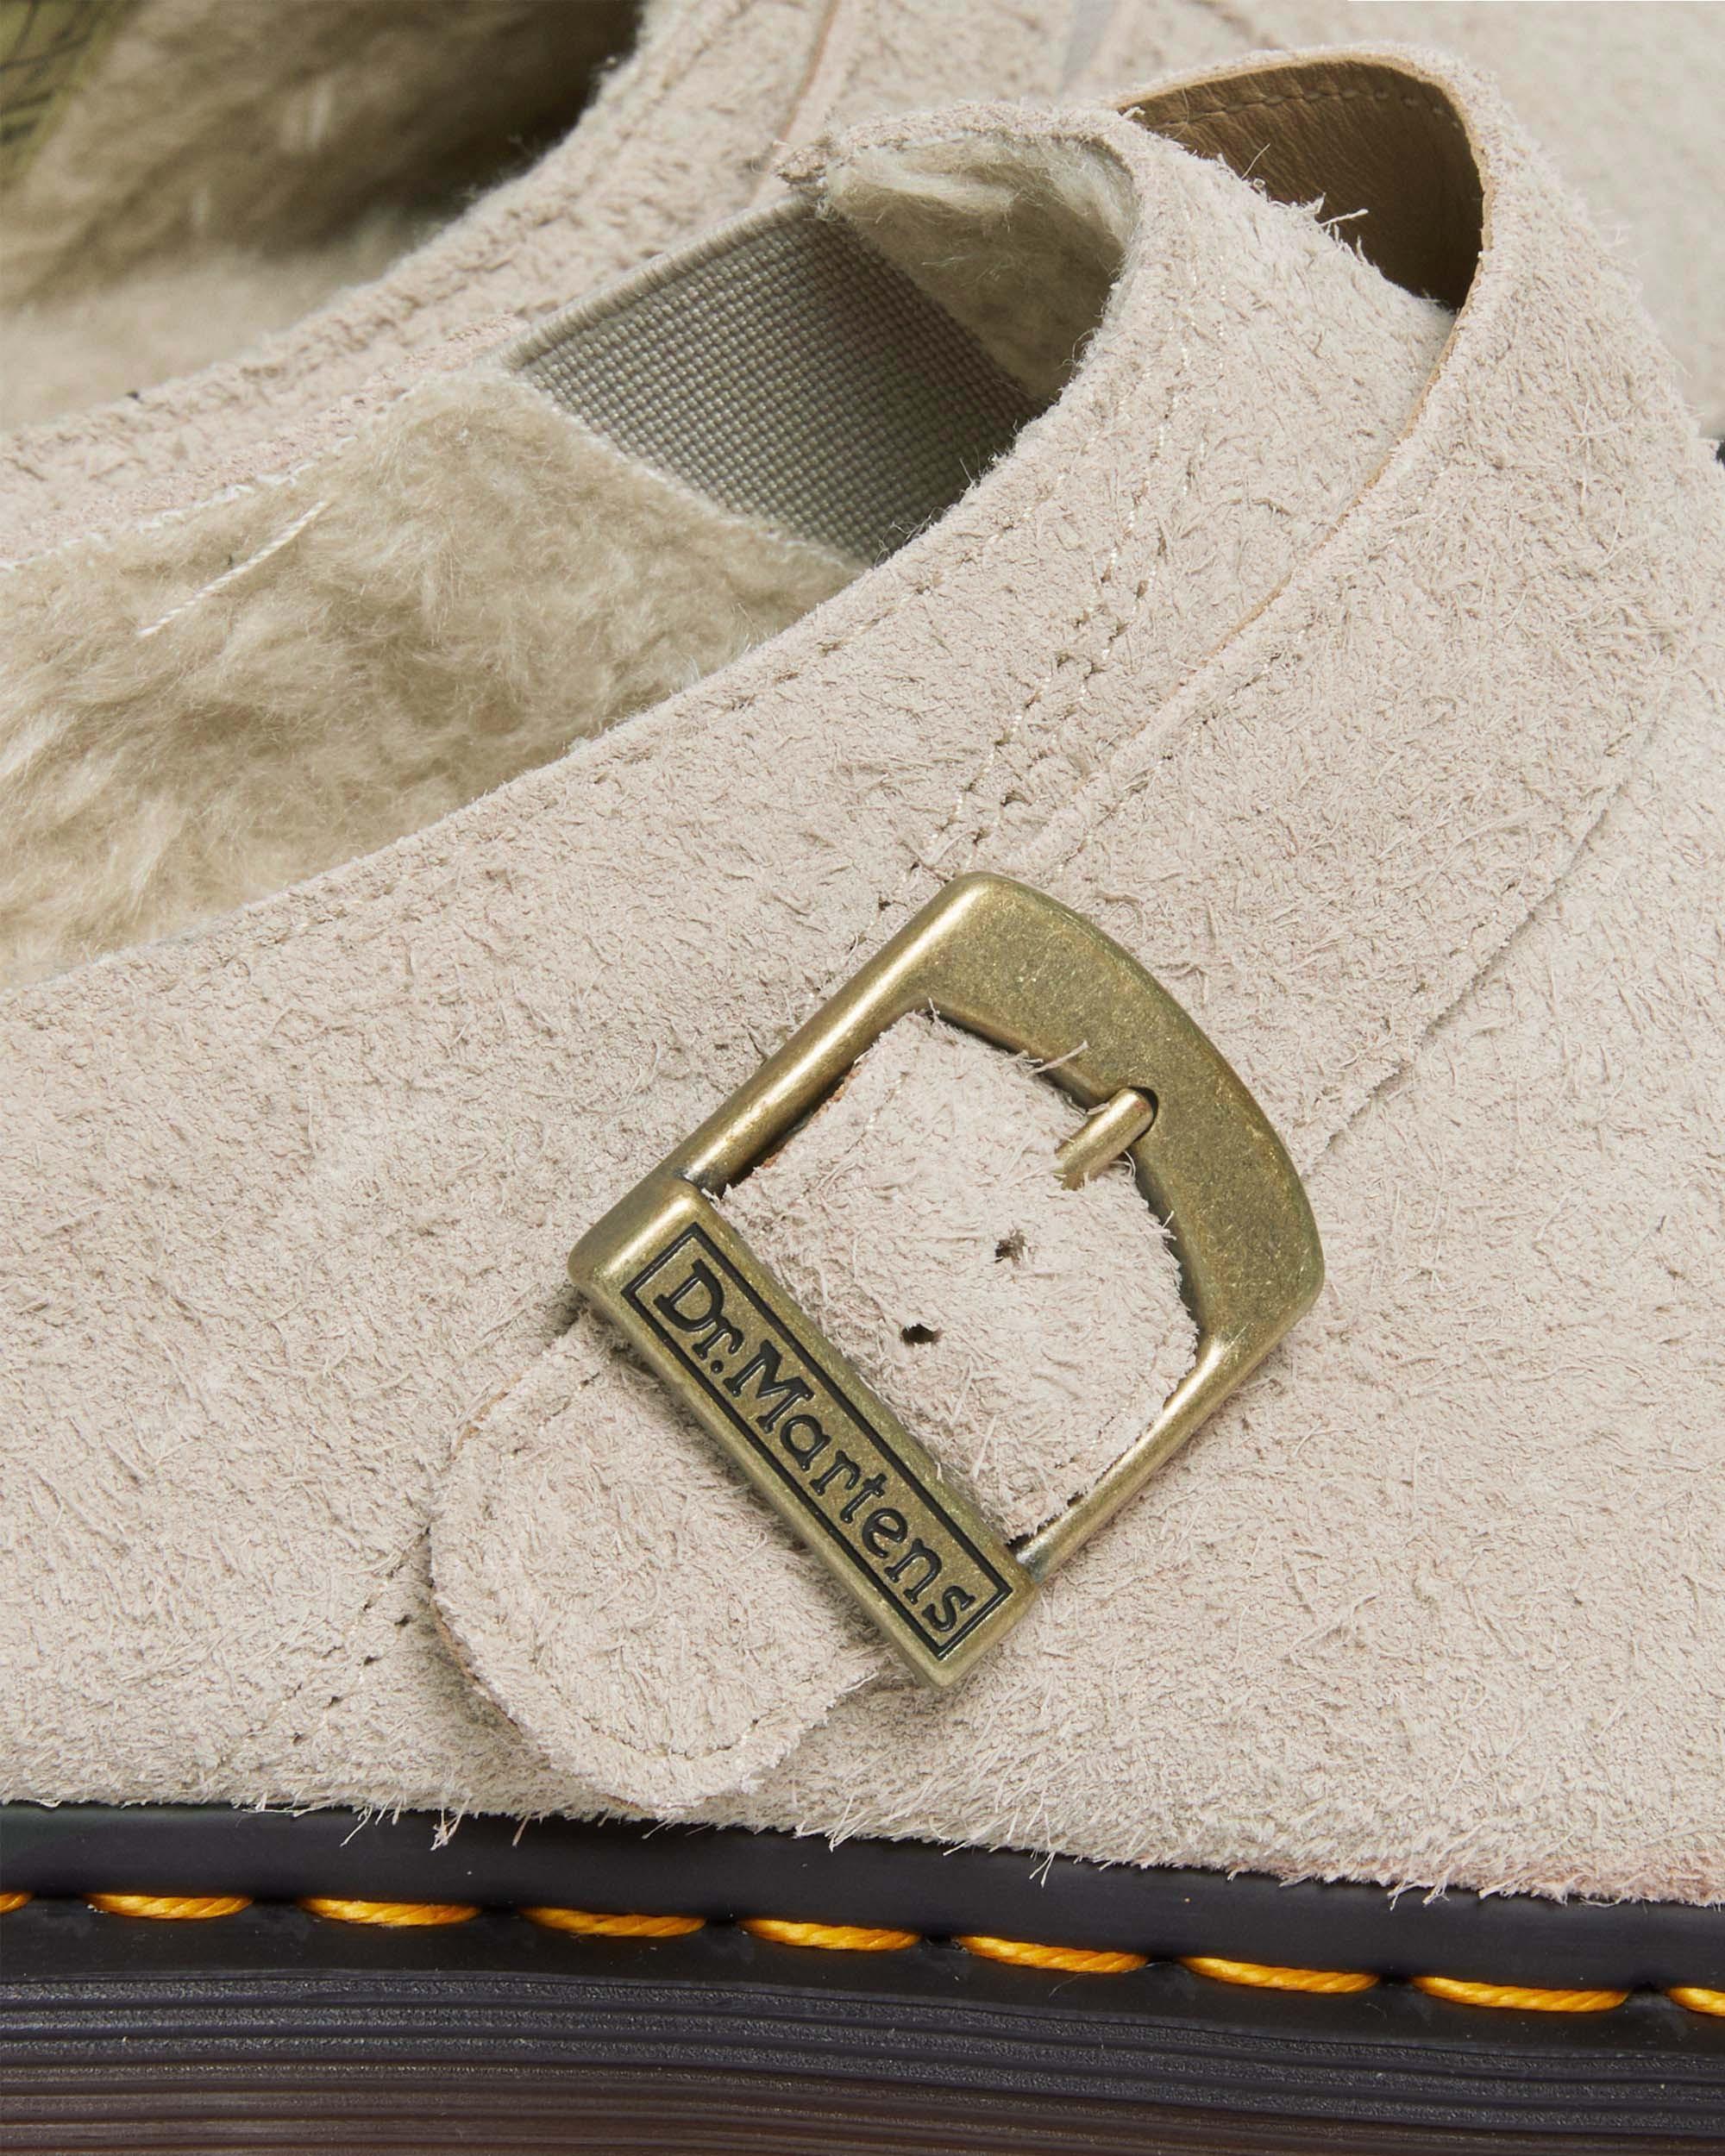 Isham Faux Shearling Lined Suede Mules in VINTAGE TAUPE